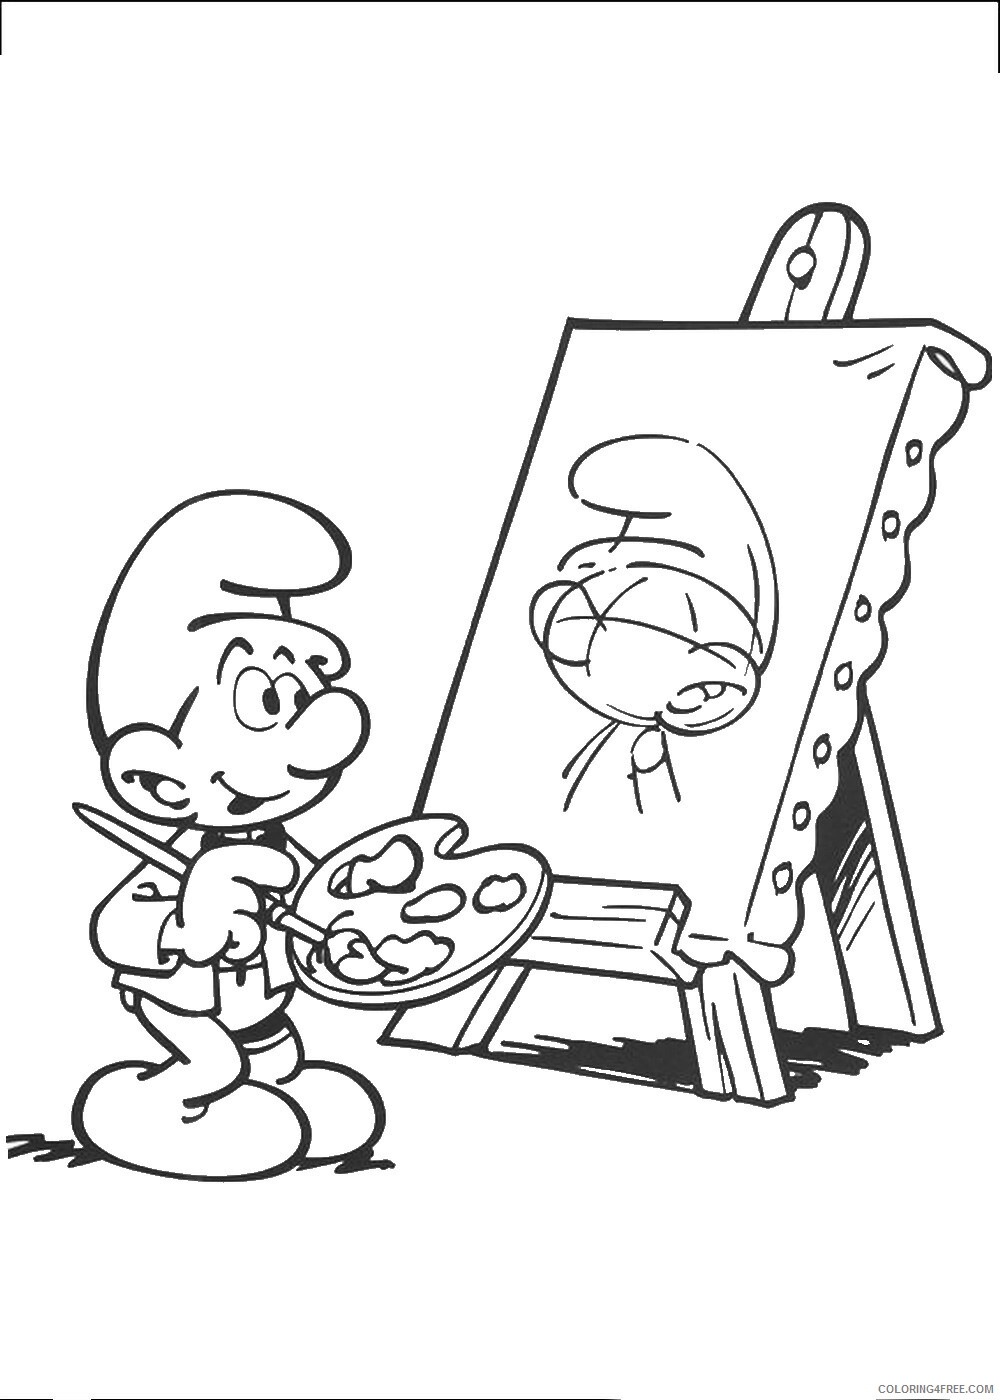 The Smurfs Coloring Pages TV Film smurfs_30 Printable 2020 09731 Coloring4free